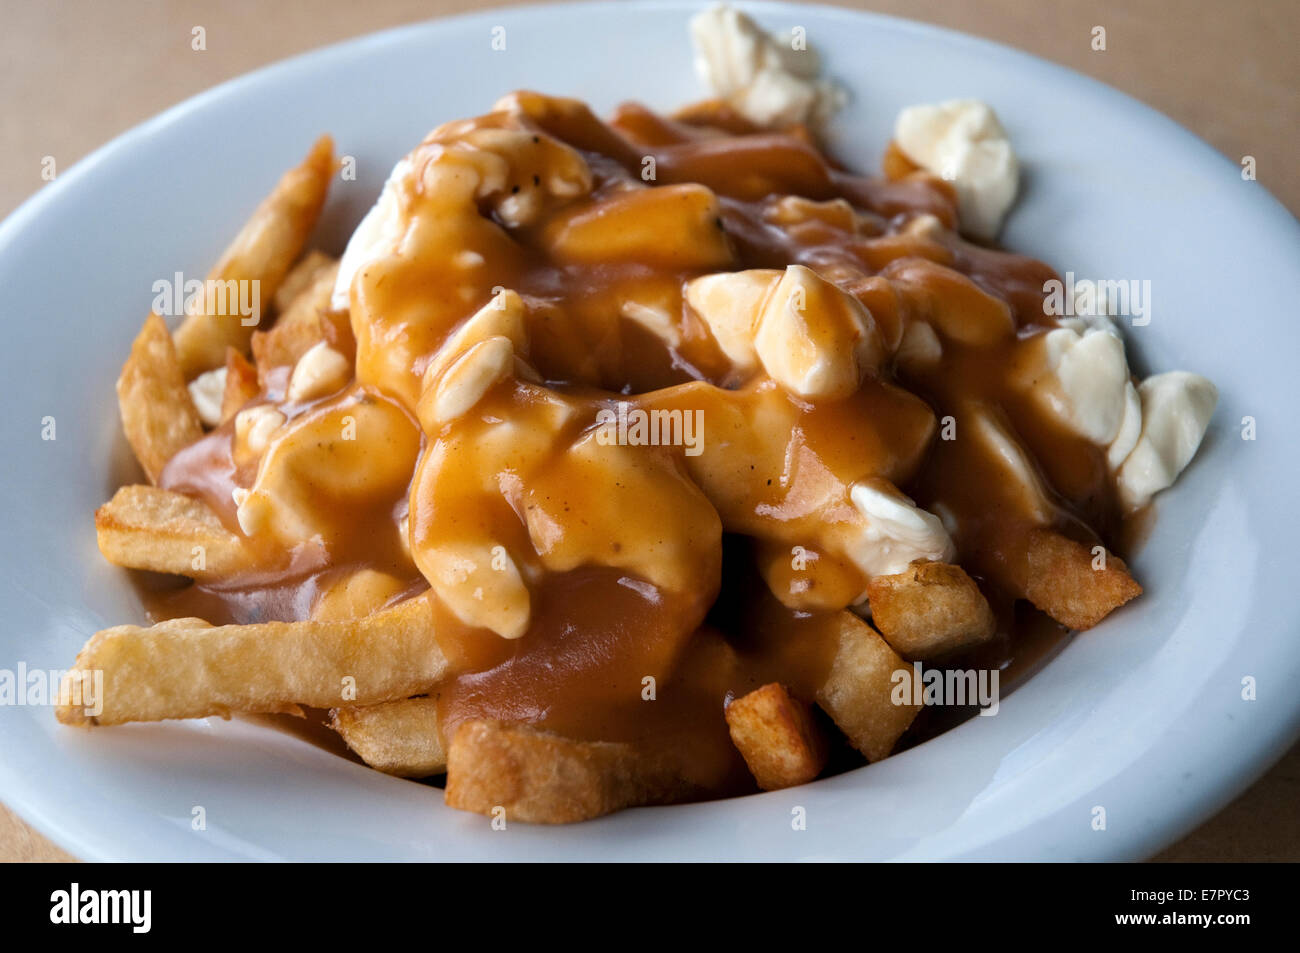 The famous 'traditional' poutine at Le Roy Jucep restaurant (the inventors of the dish) in Drummondville, Quebec, Canada. Stock Photo